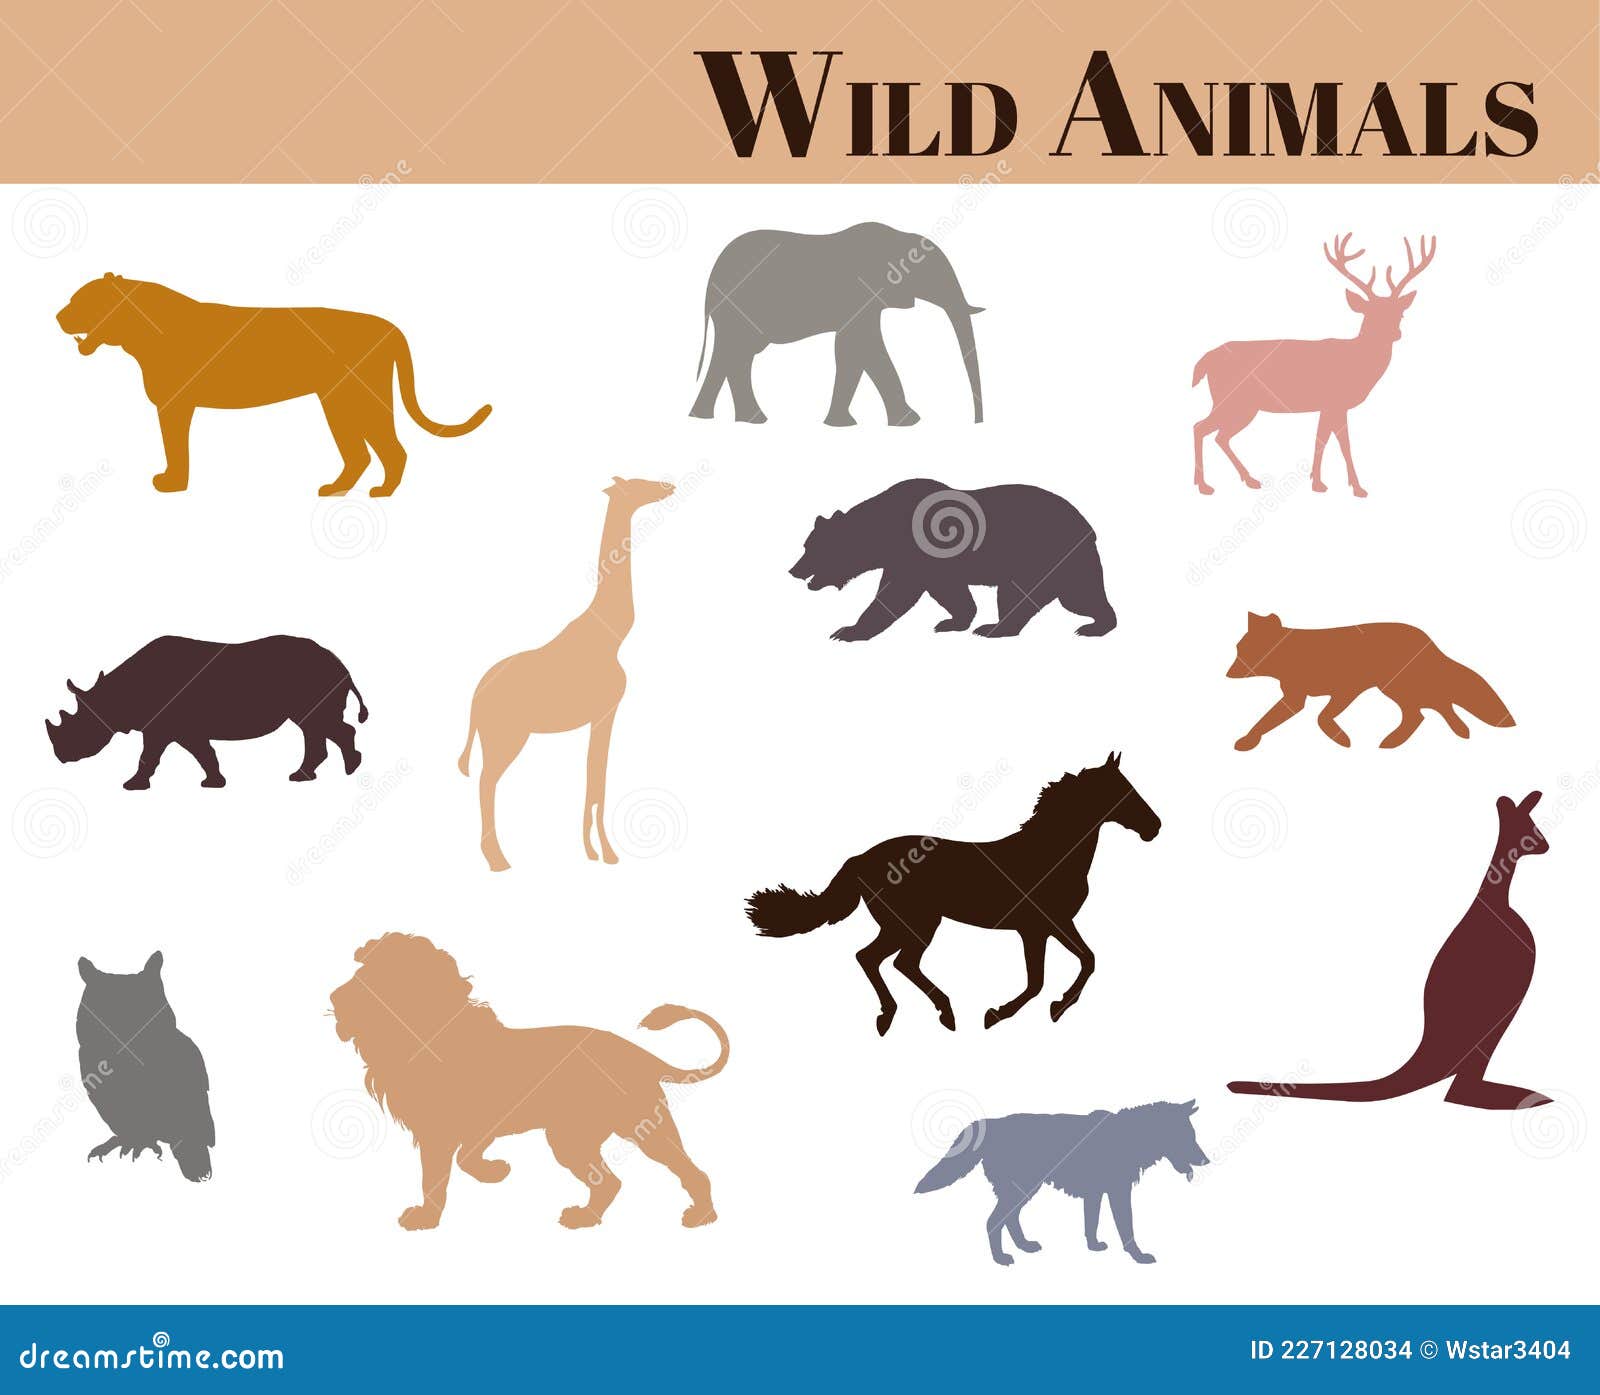 Various Wild Animals Vector Icon Set in Different Colors on White  Background. Stock Vector - Illustration of land, isolated: 227128034